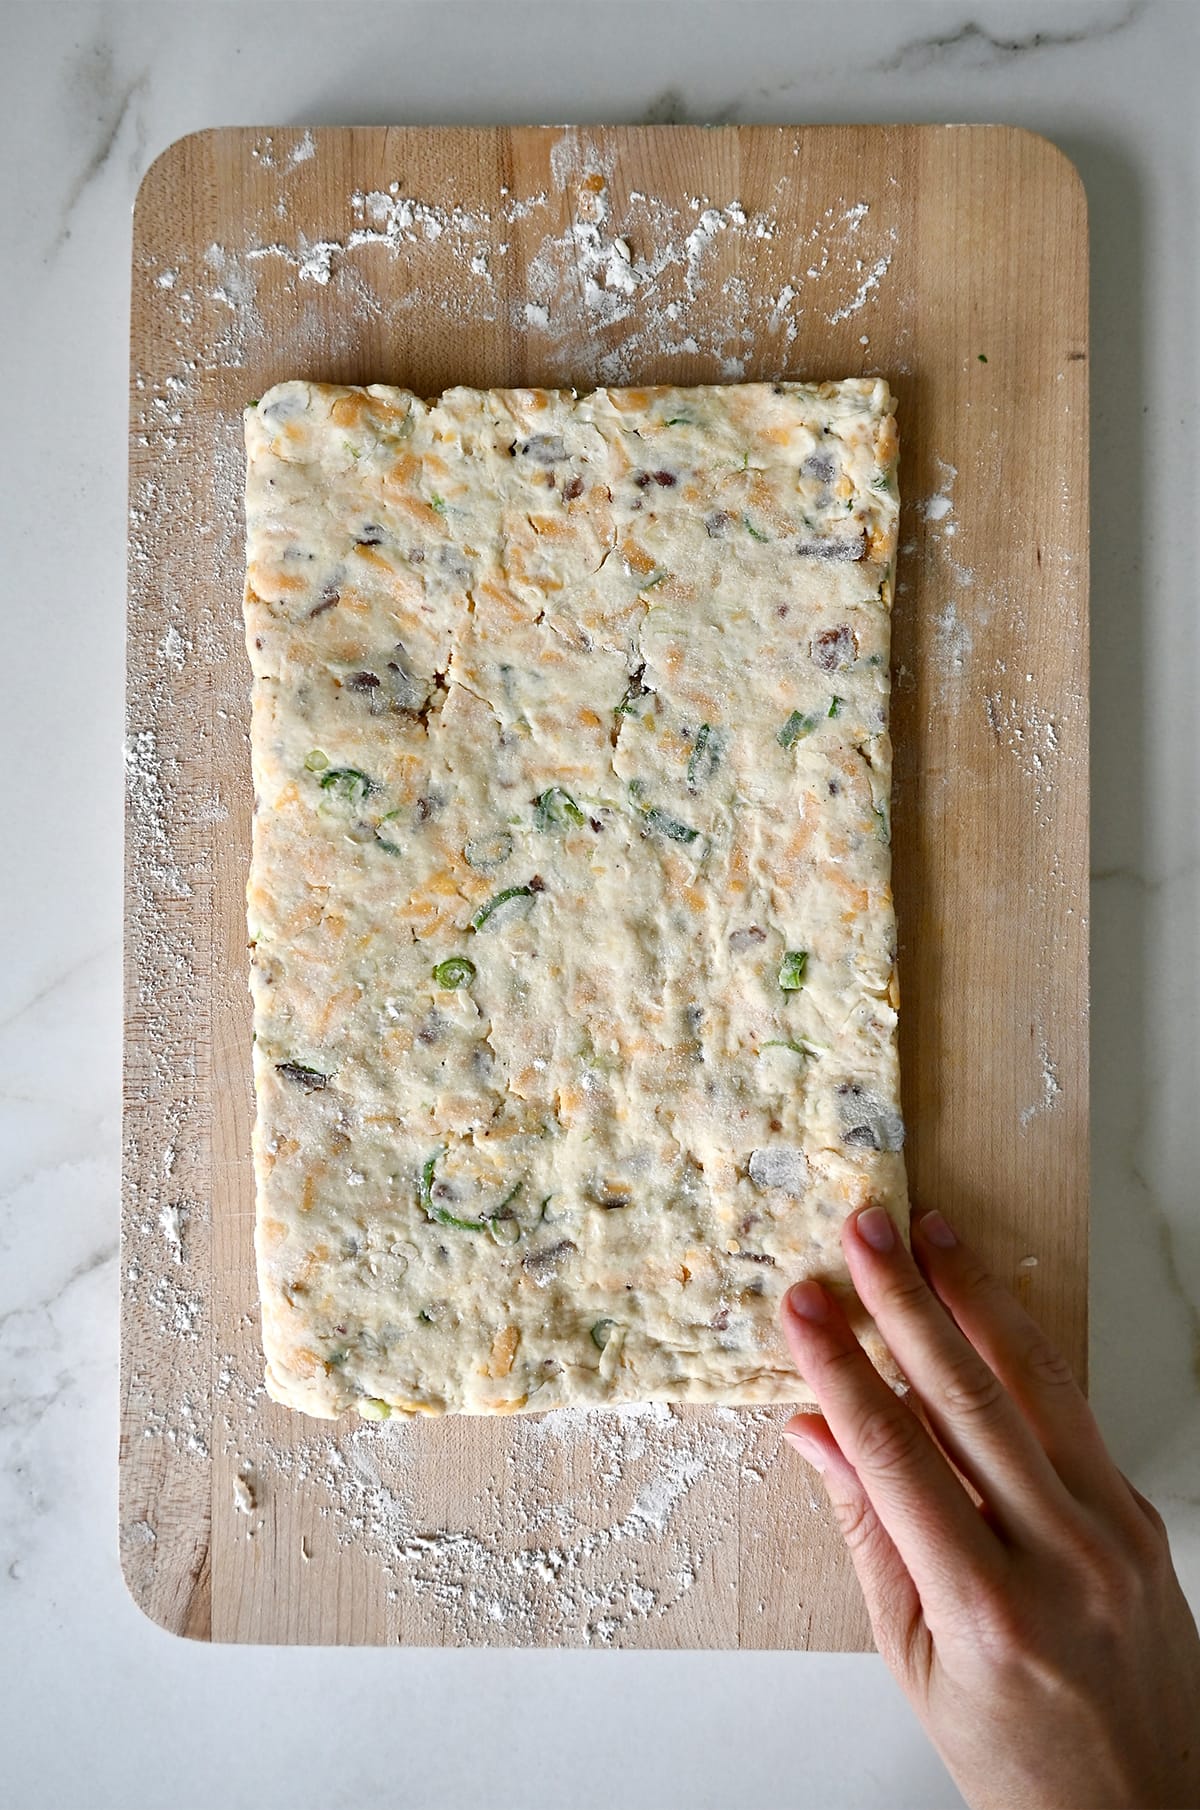 Biscuit dough with cheese, scallions and bacon shaped into a rectangle on a wood cutting board.